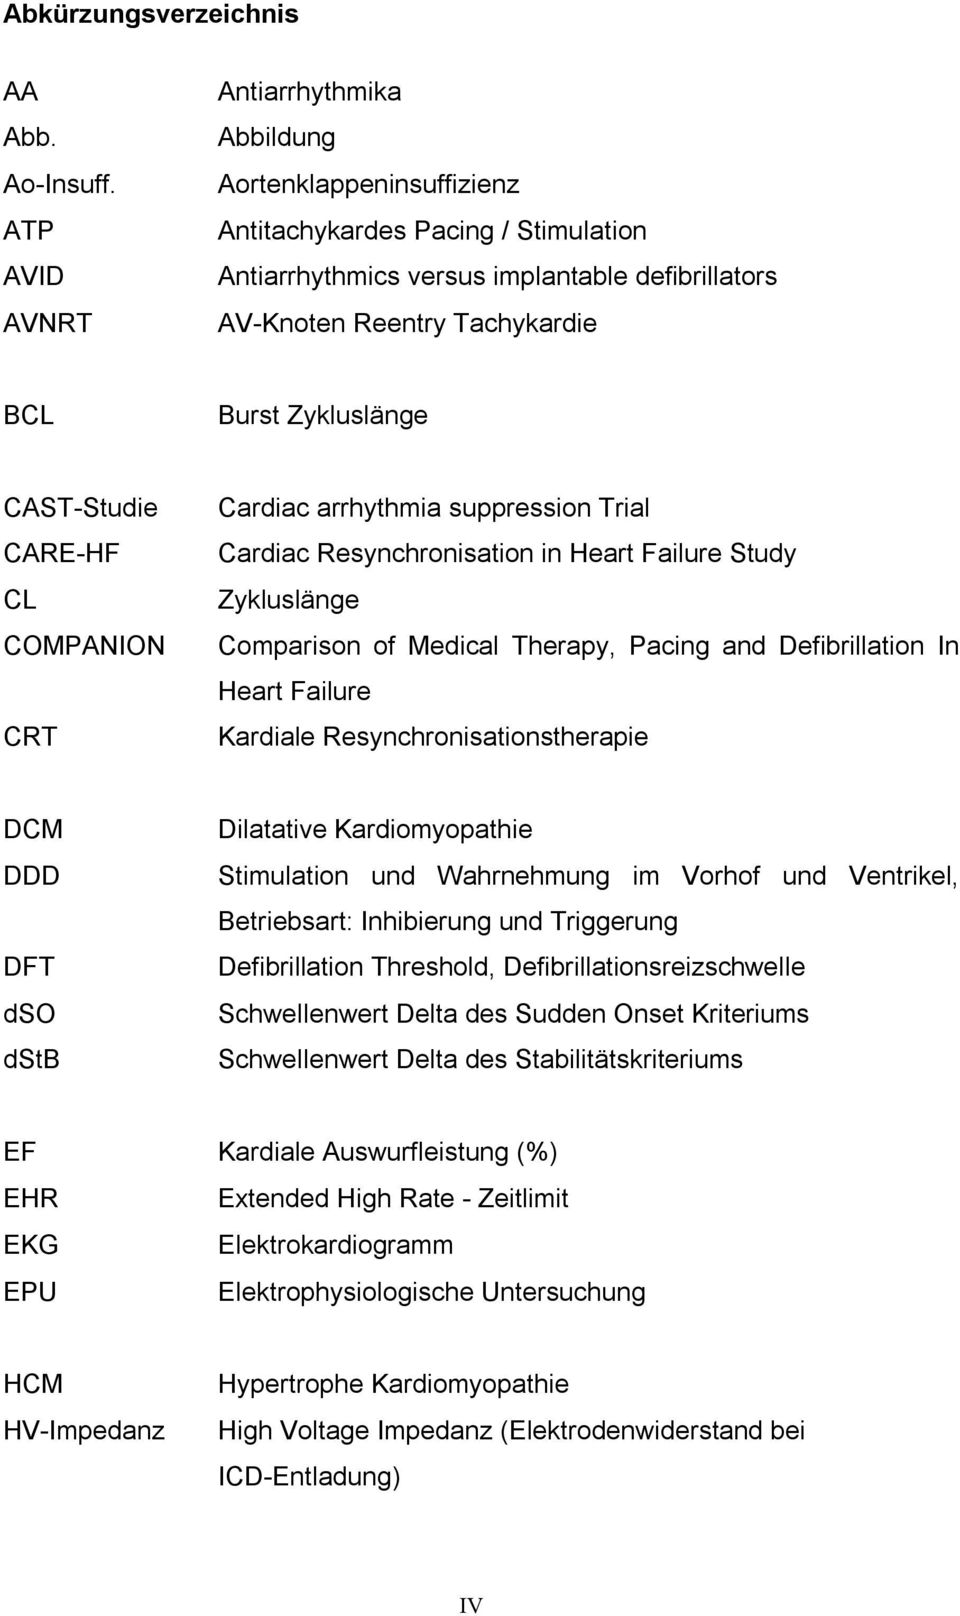 Zykluslänge CAST-Studie CARE-HF CL COMPANION CRT Cardiac arrhythmia suppression Trial Cardiac Resynchronisation in Heart Failure Study Zykluslänge Comparison of Medical Therapy, Pacing and